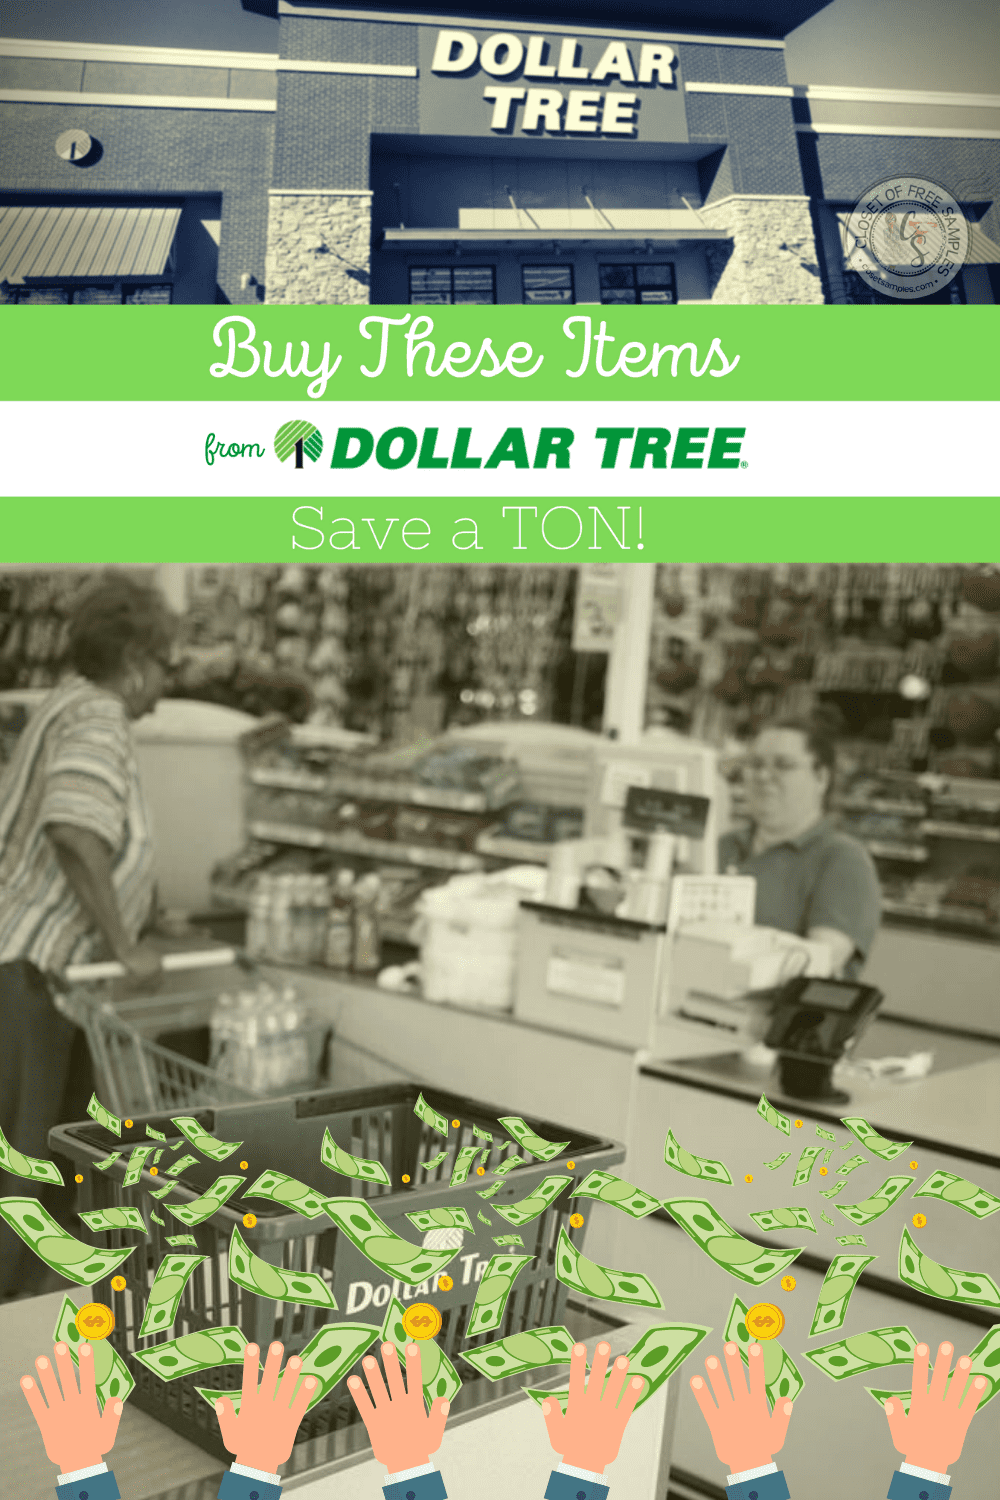 Buy-These-Items-from-Dollar-Tree-and-Save-a-TON-closetsamples.png